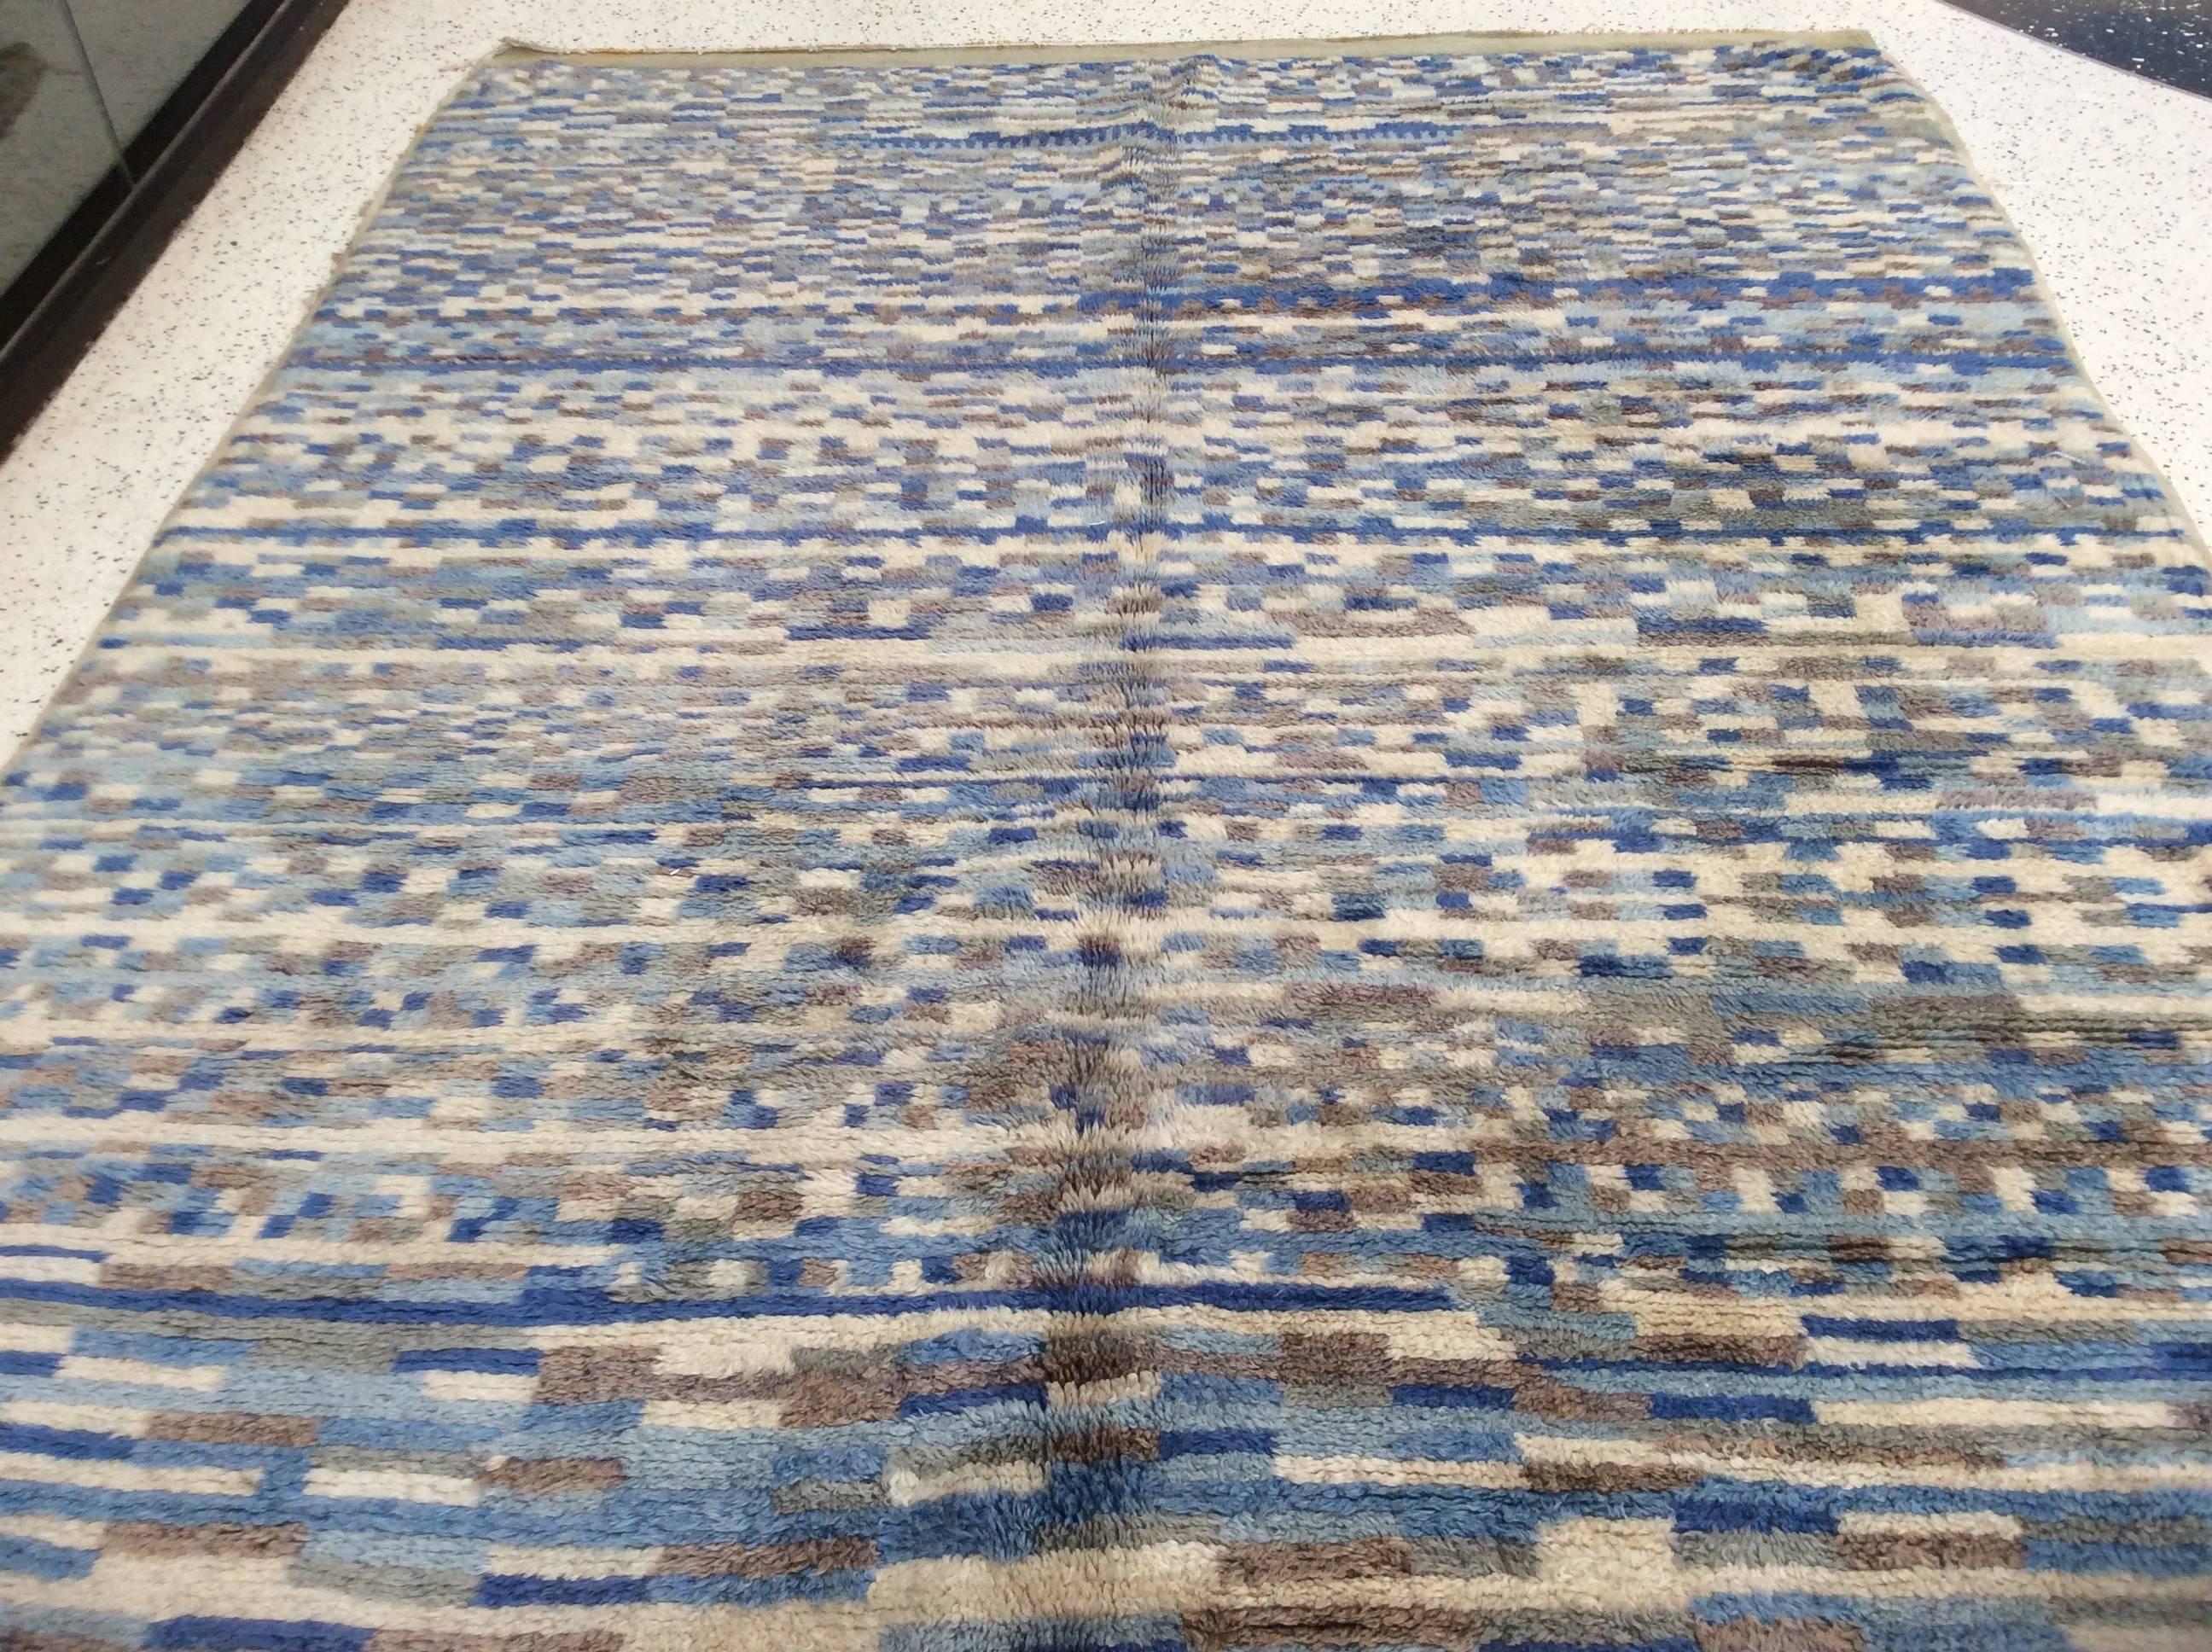 Moroccan Berber Rug in Shades of Blue In Excellent Condition For Sale In Los Angeles, CA